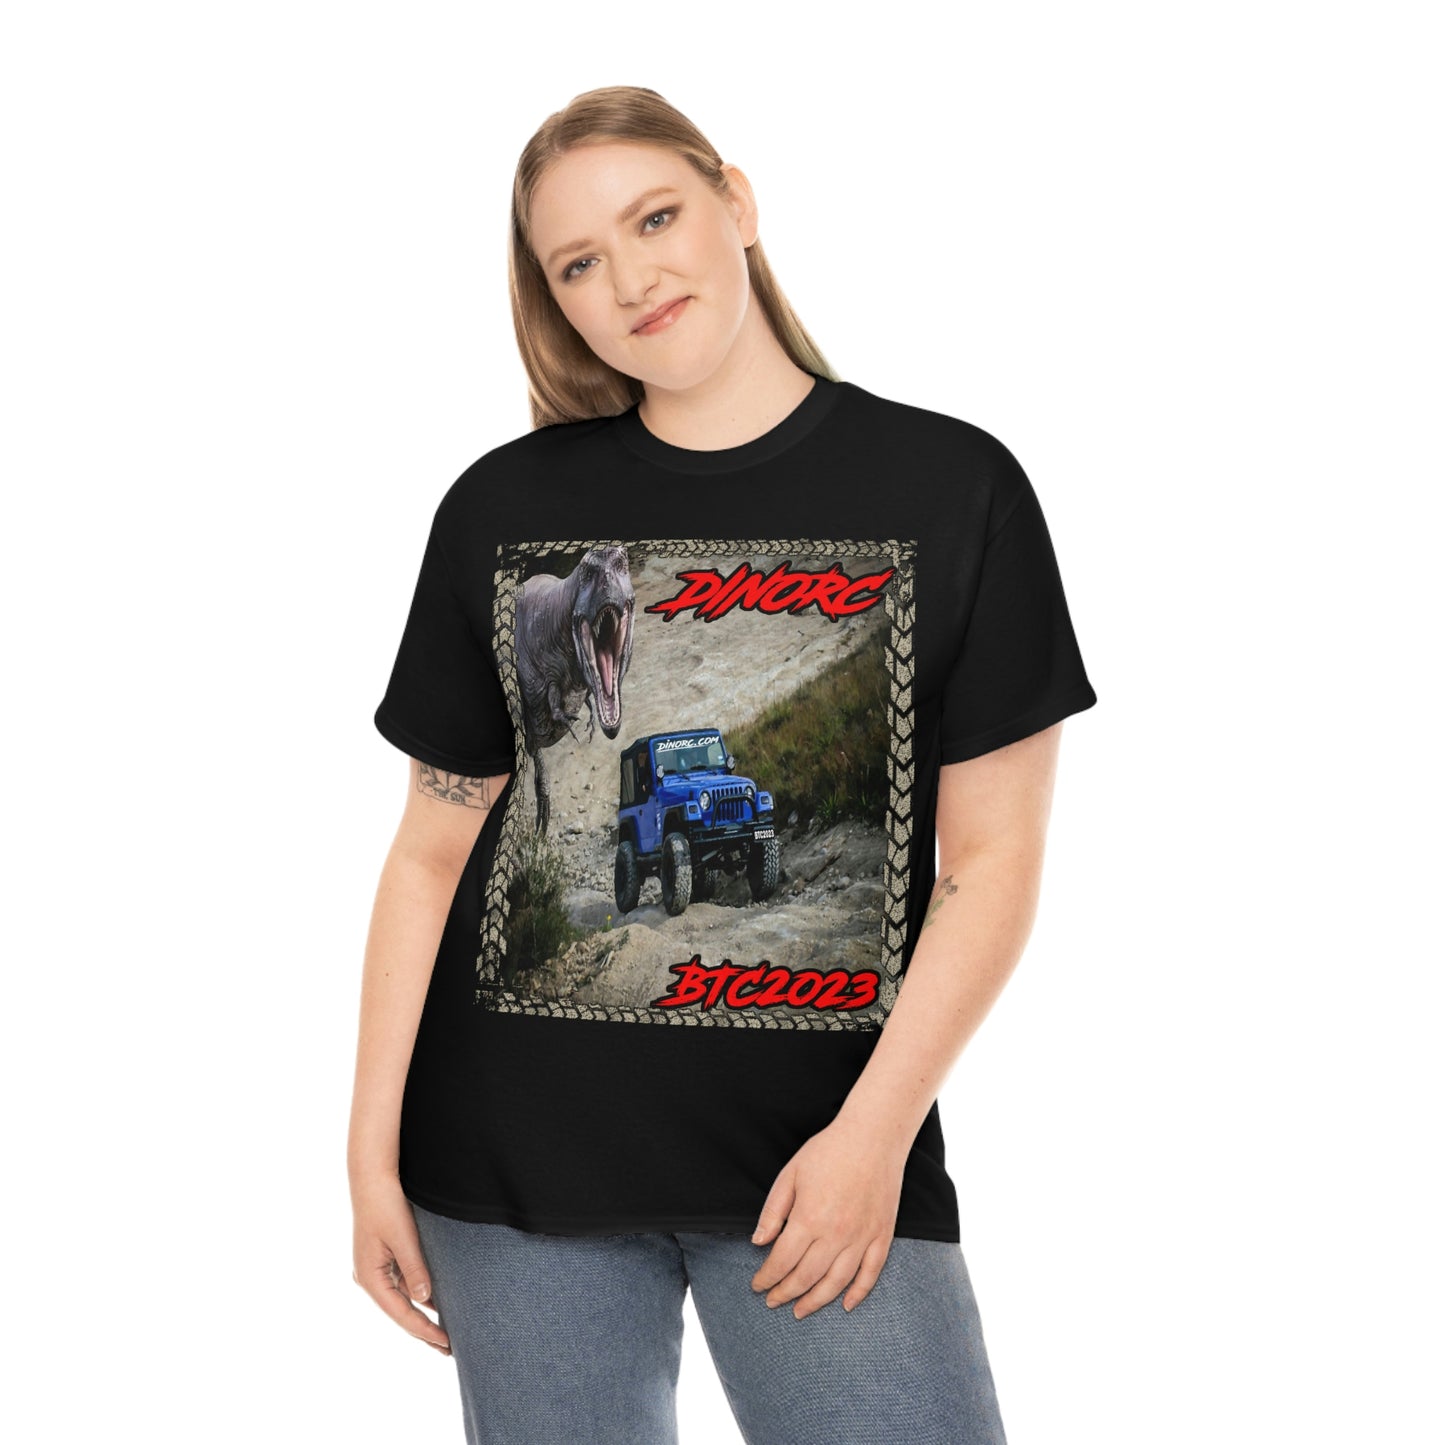 Headlights Beat The Barn BTC DinoRC logo Front and Back DinoRc Logo T-Shirt S-5x 5 colors